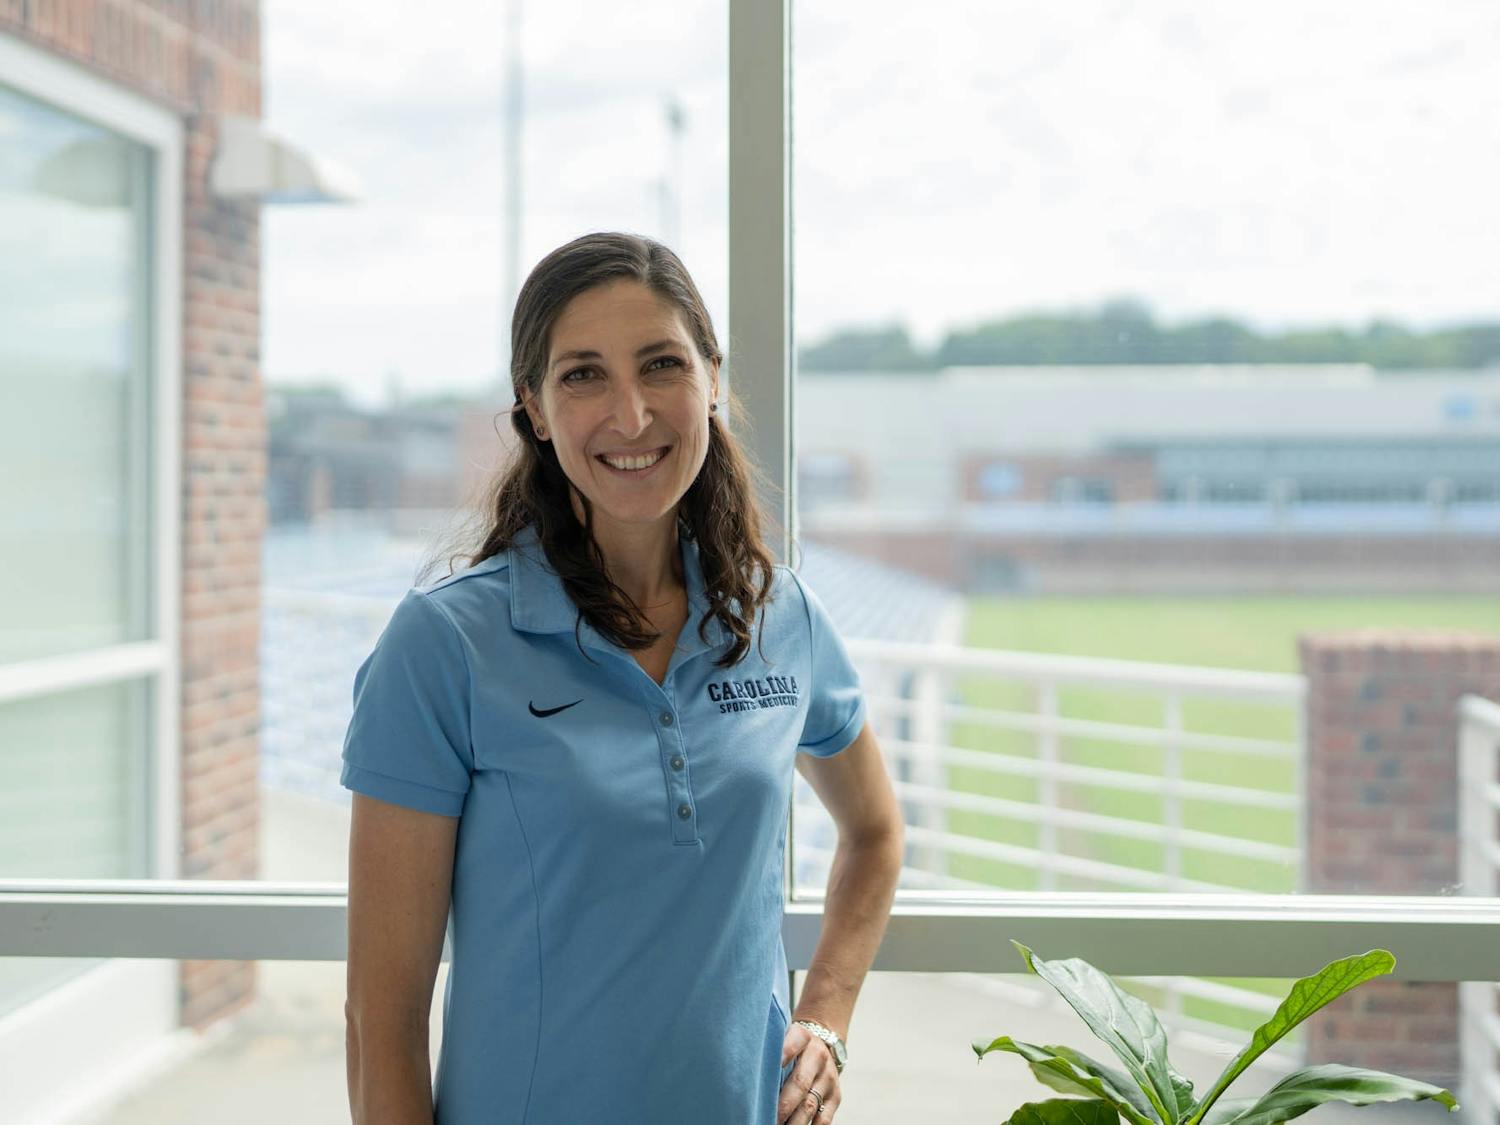 Dr. Jeni Shannon, director of the Carolina Athletics Mental Health and Performance Psychology Program (AMP), poses for a portrait in her office in the McCaskill Soccer Center on Monday, June 20, 2022. Shannon, in collaboration with The Hidden Opponent, helped organize a student-led panel on mental health in athletics.